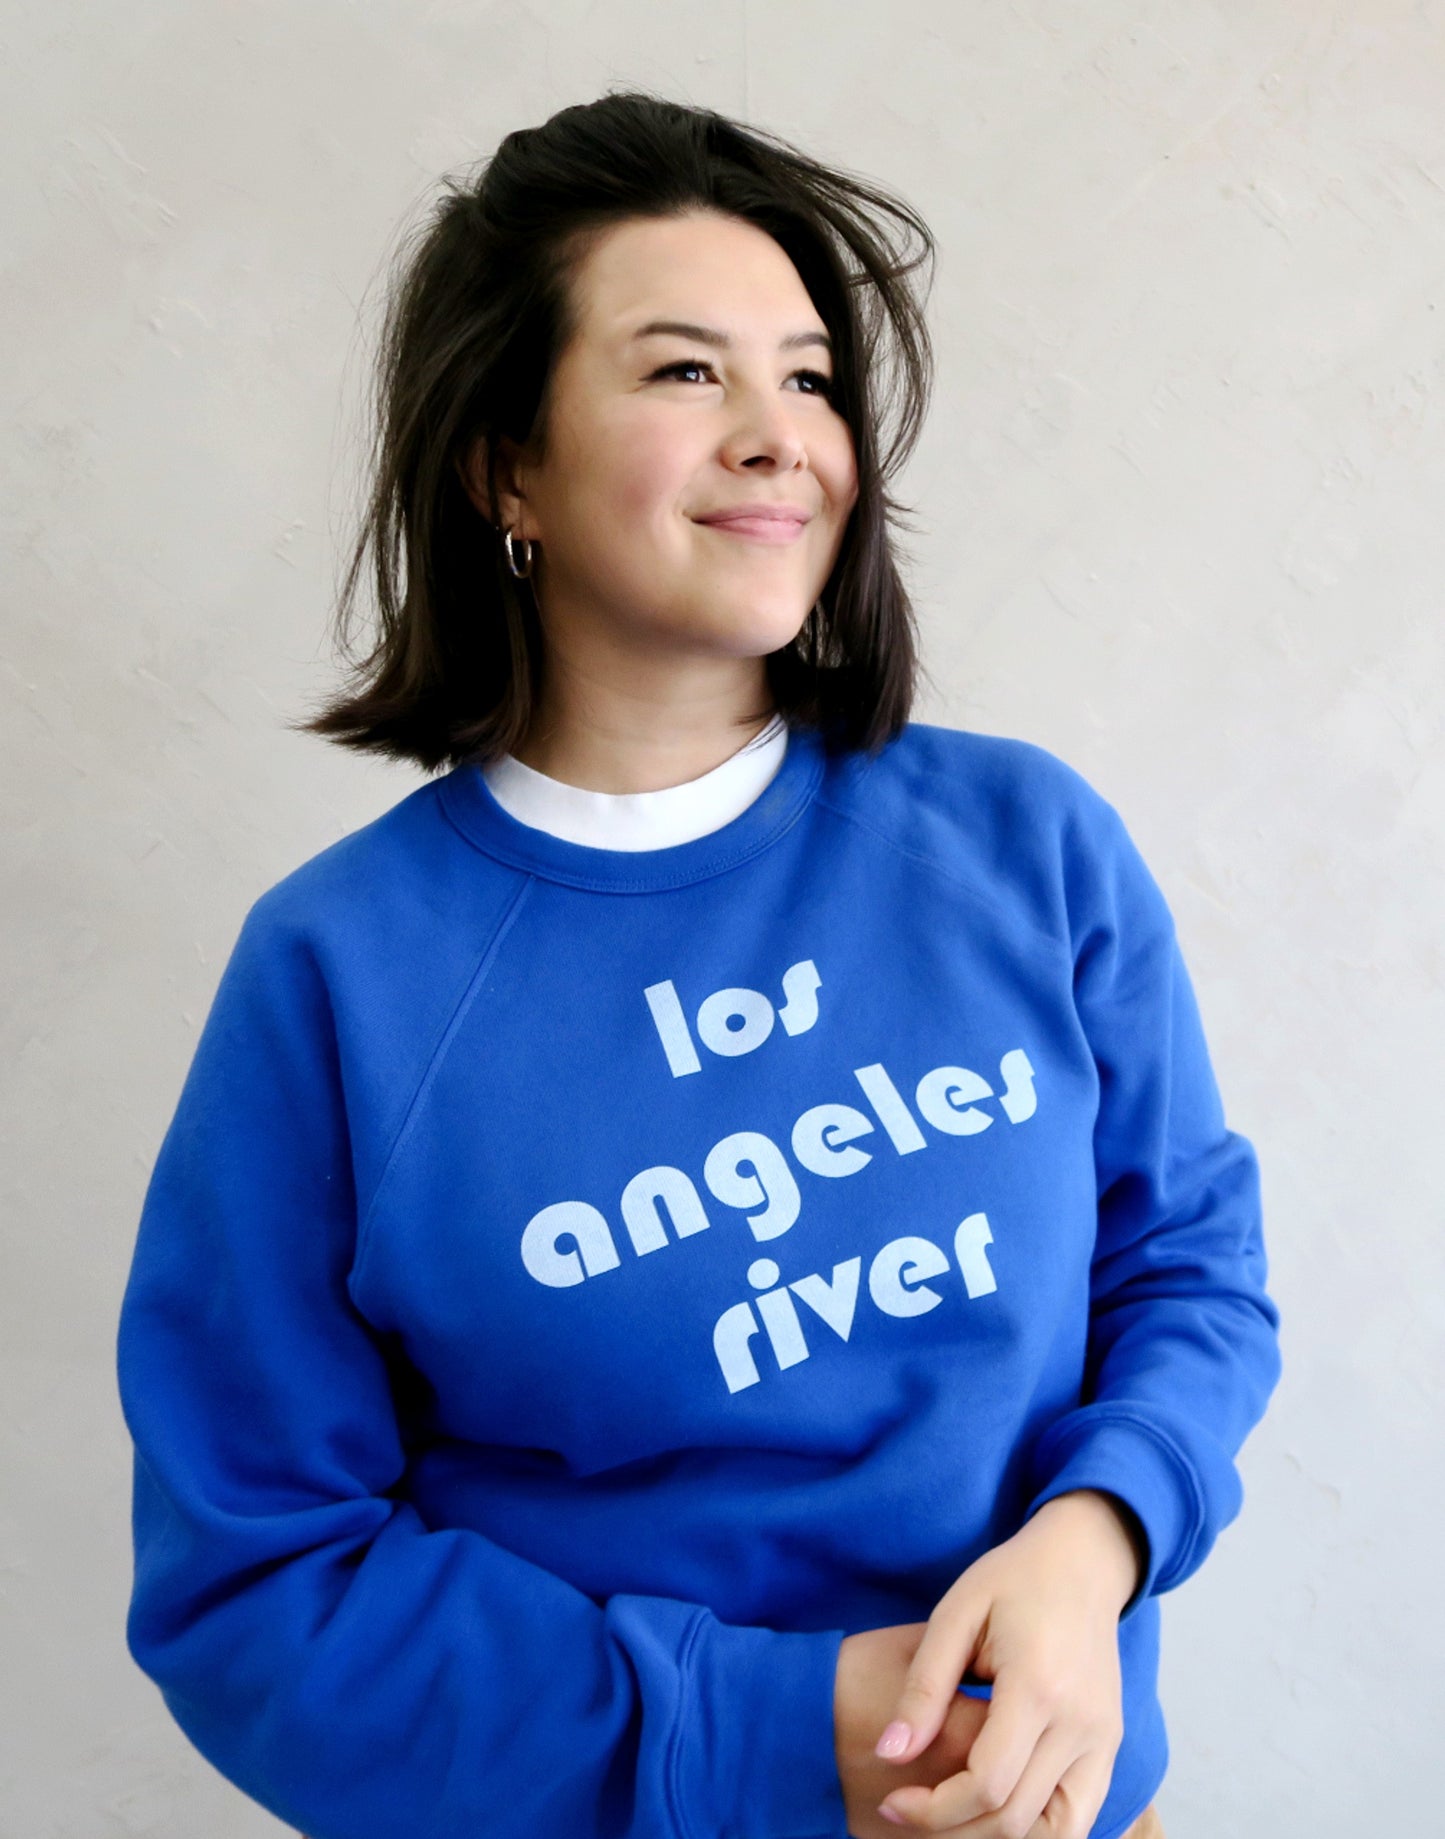 Los Angeles River Sweater